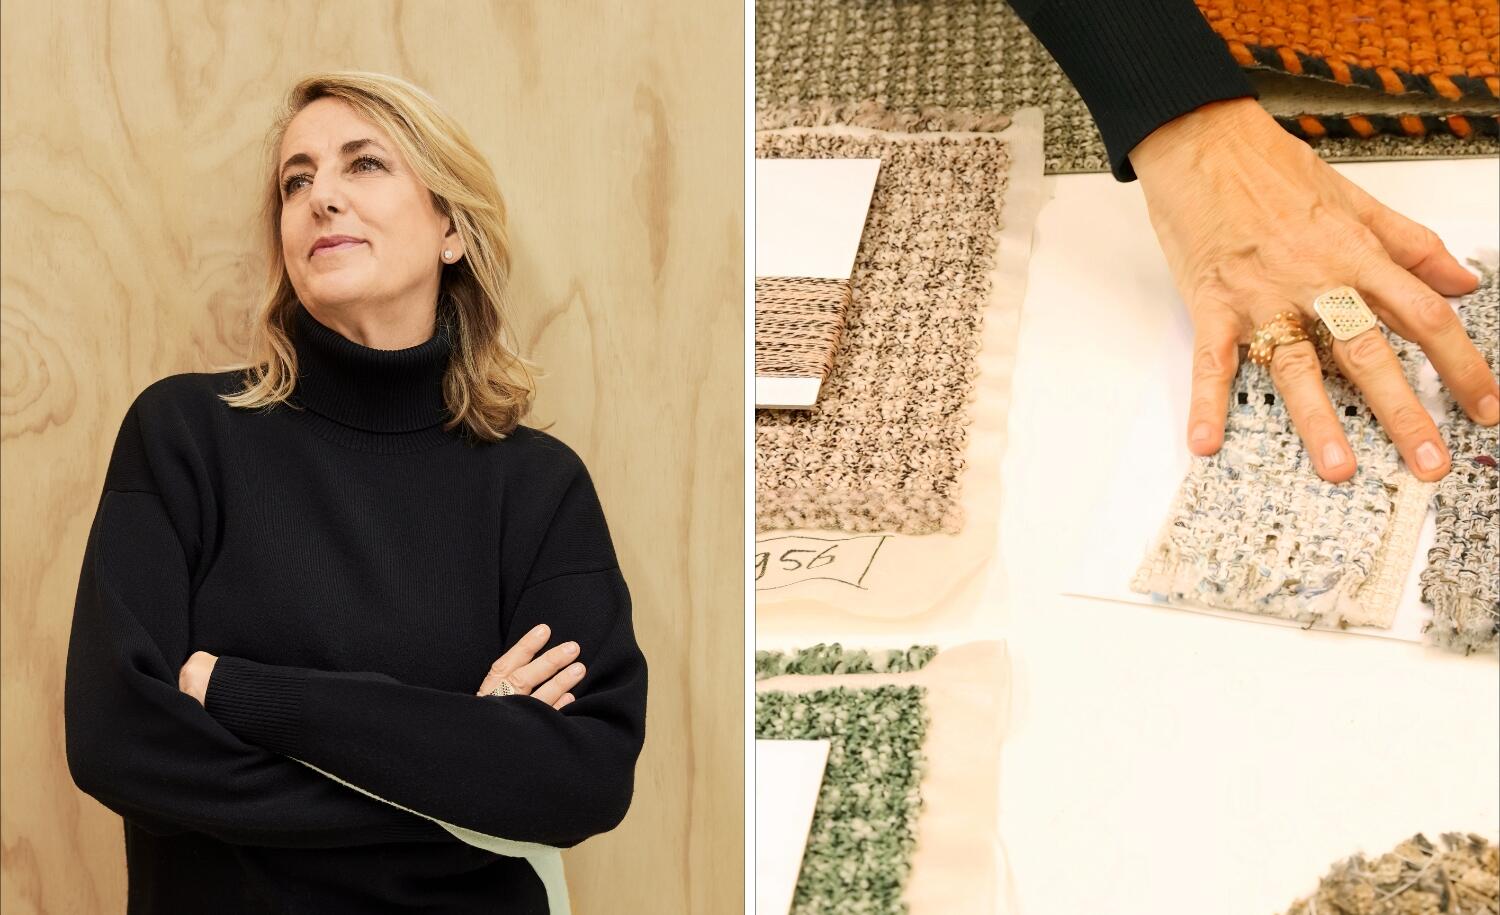 Portrait Image Patricia Urquiola and the behind the scenes of creating a carpet tile collection with DESSO